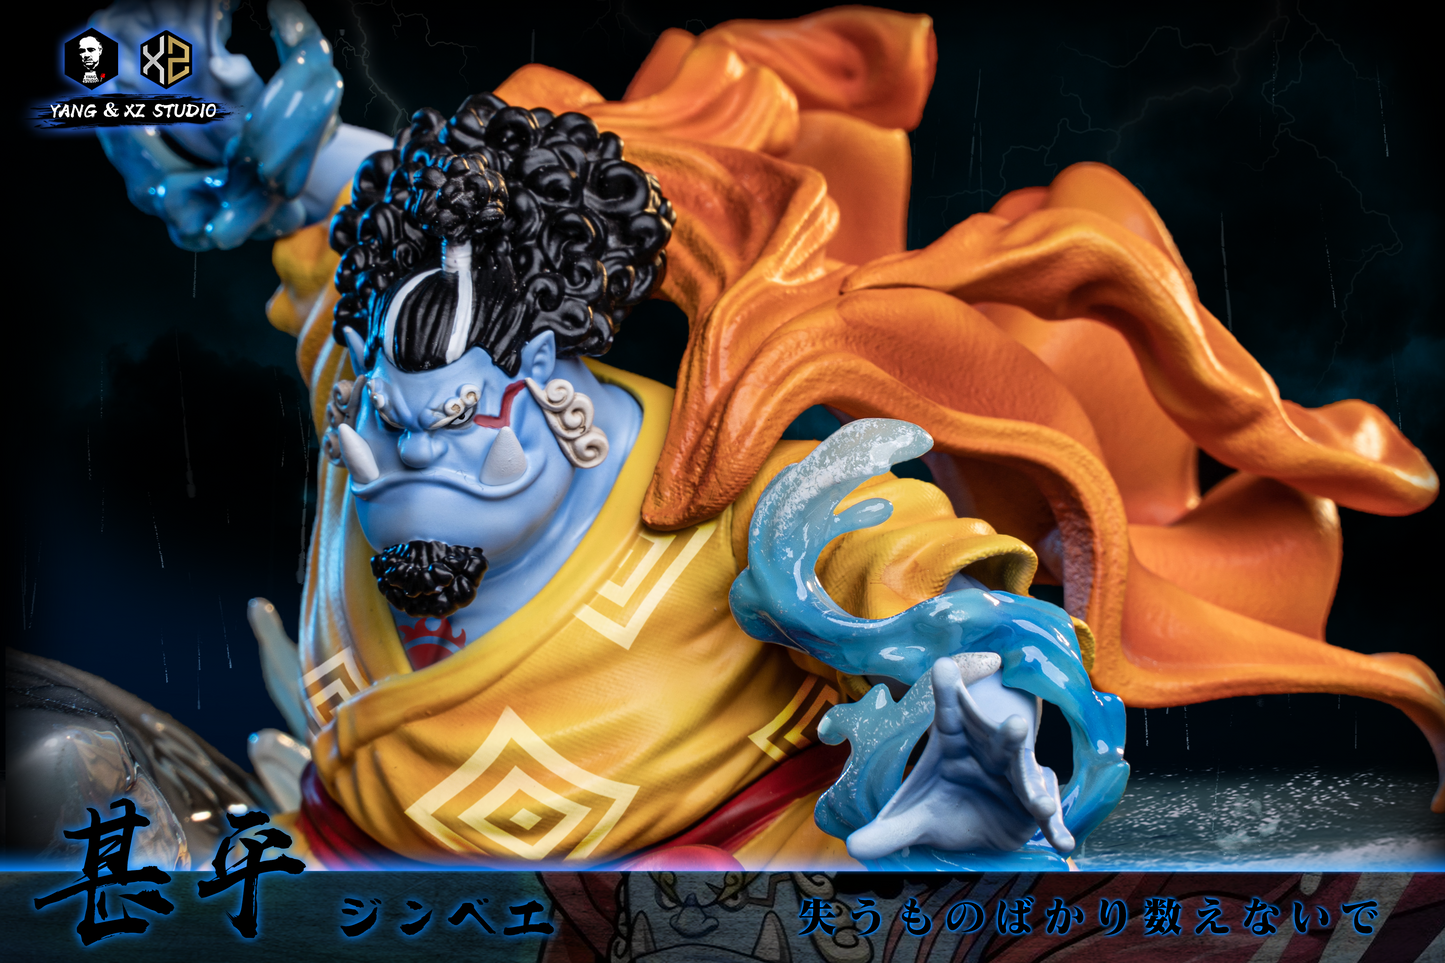 XS x YANG STUDIO – ONE PIECE: STRAW HAT PIRATES, JINBE [SOLD OUT]